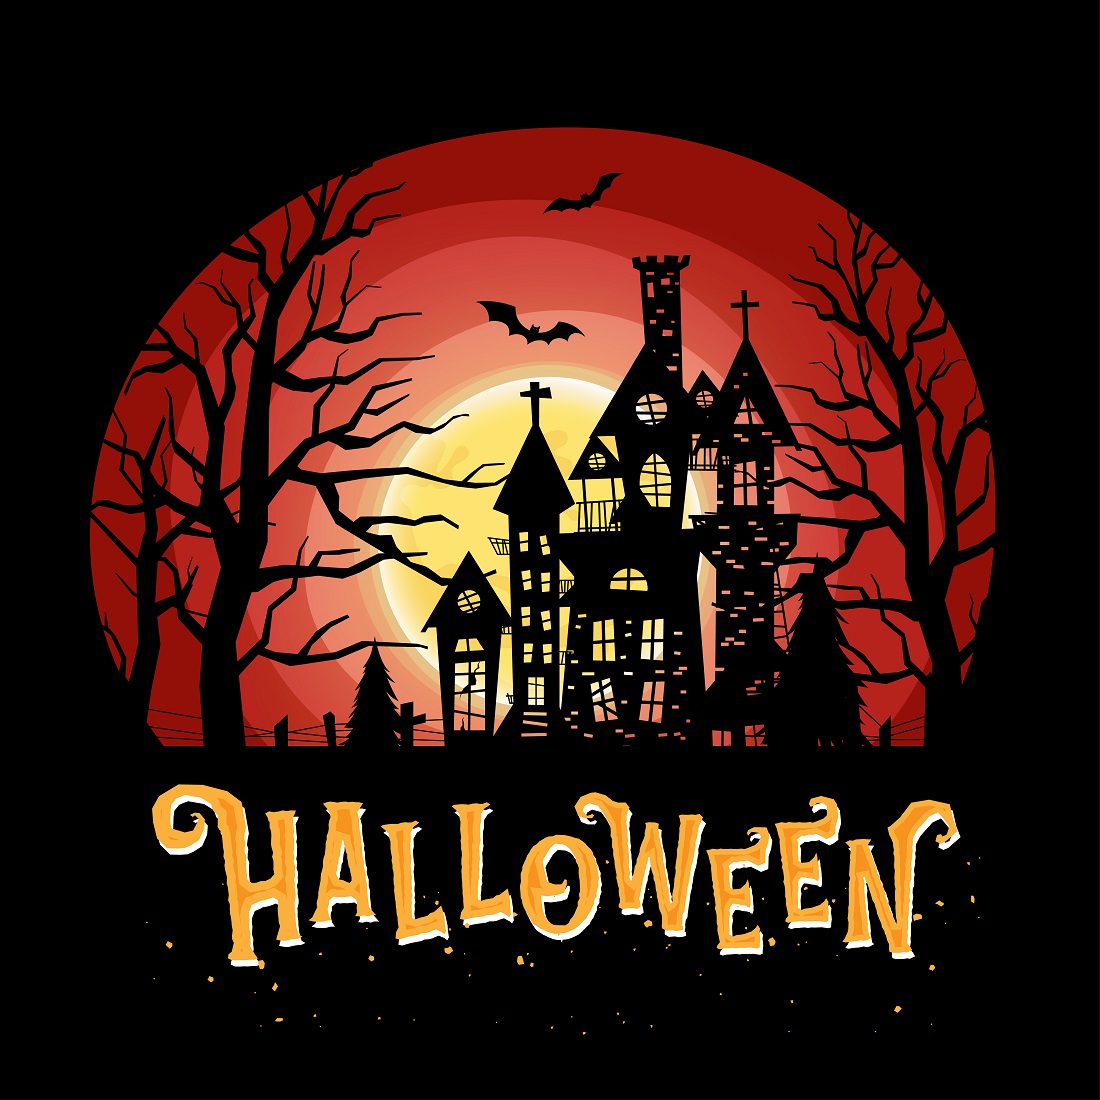 Halloween celebration with night scary castle cover image.